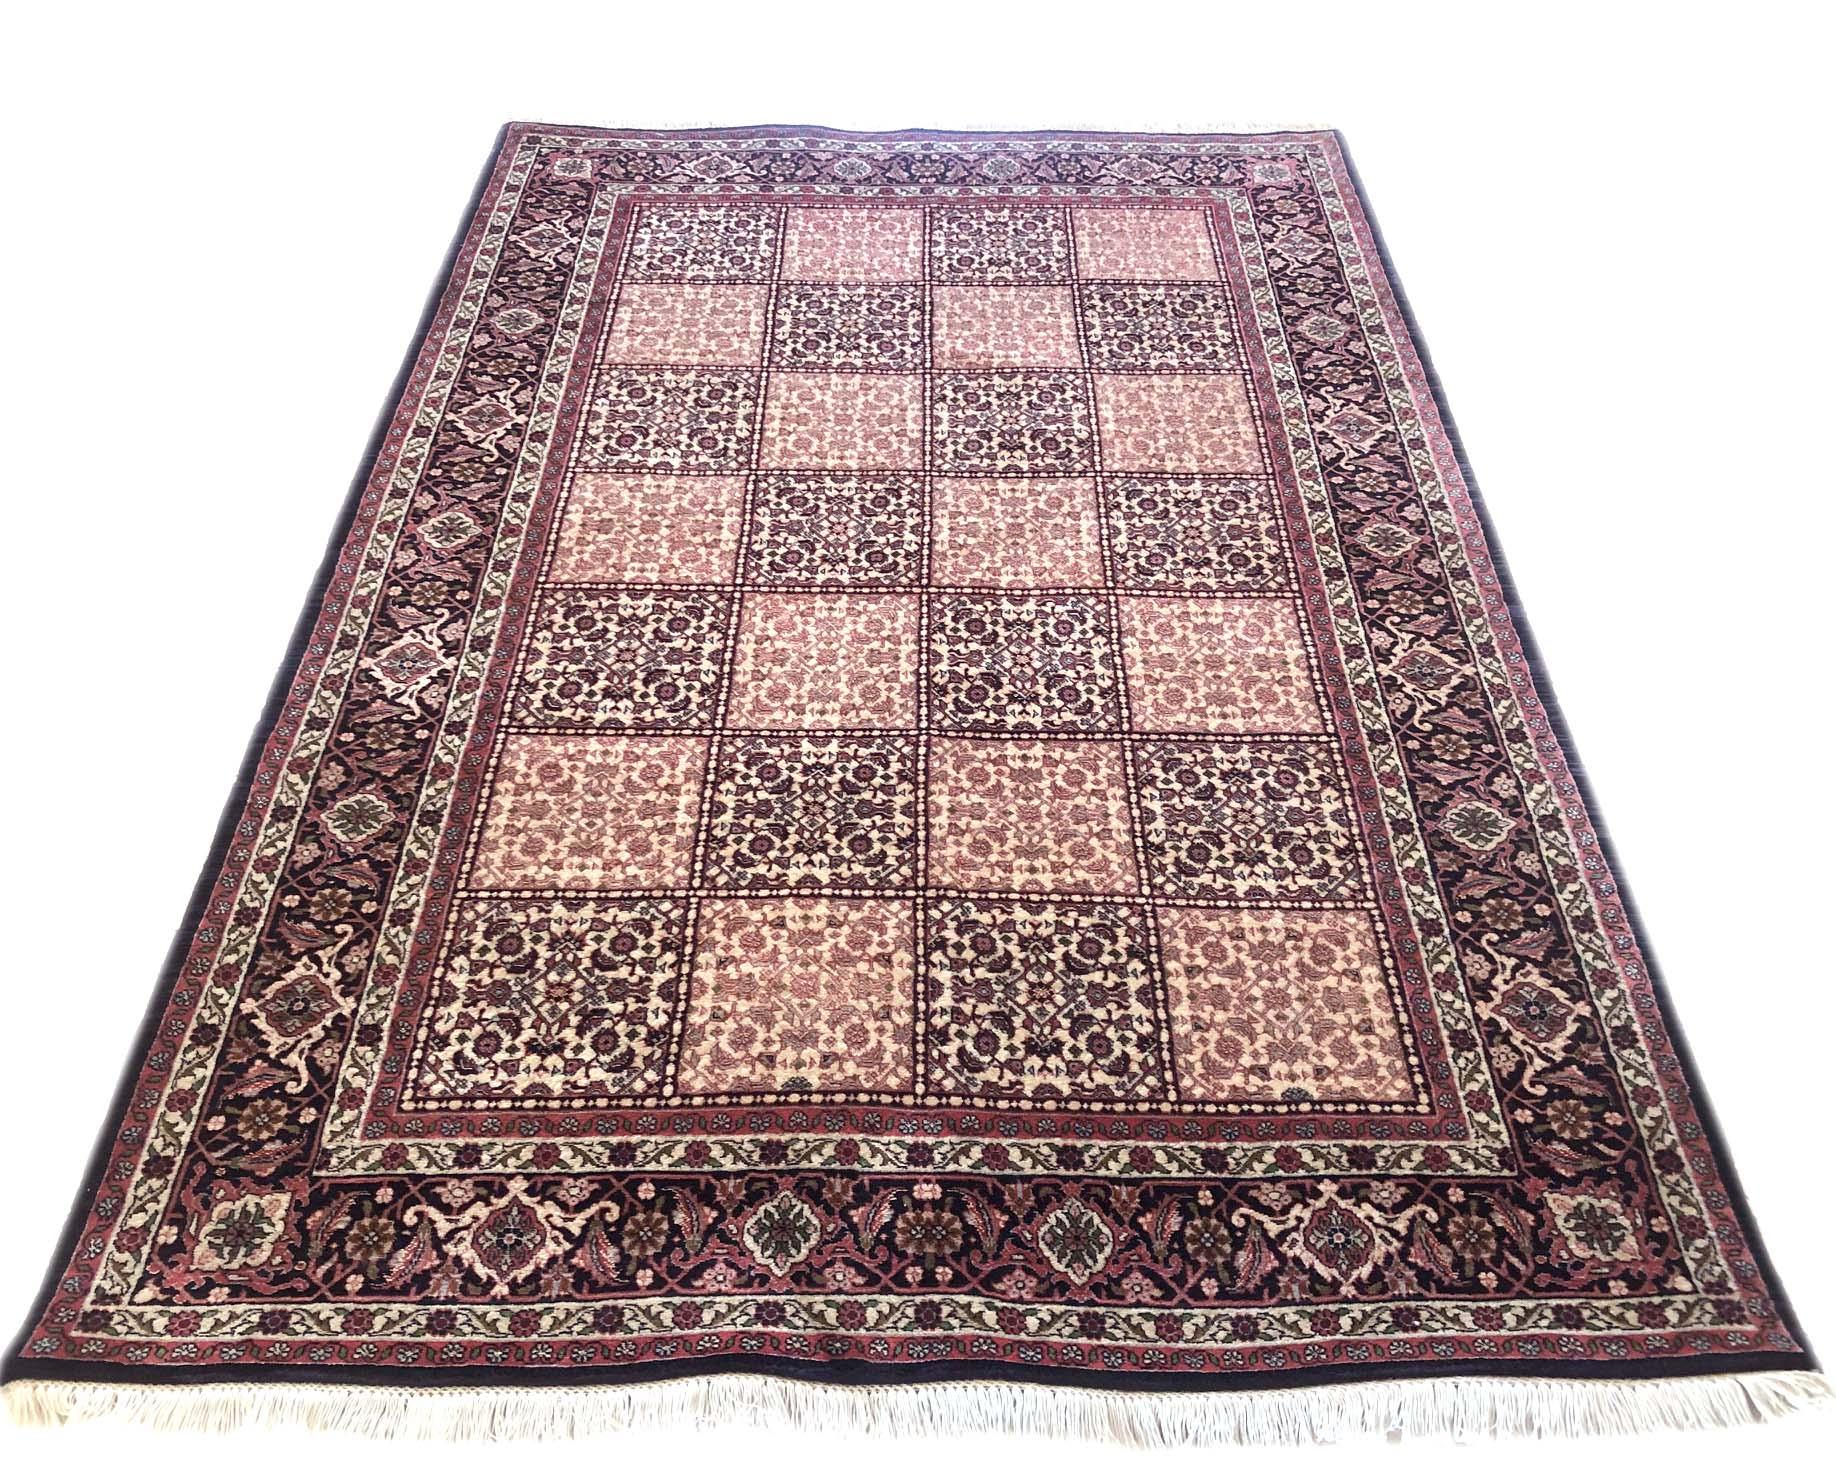 This piece is a handmade Persian Bijar rug. This piece has wool and silk with cotton foundation. The base colors are red and cream, with black border. This rug has highly detailed design with unique panel design which is a unusual pattern in Bijar